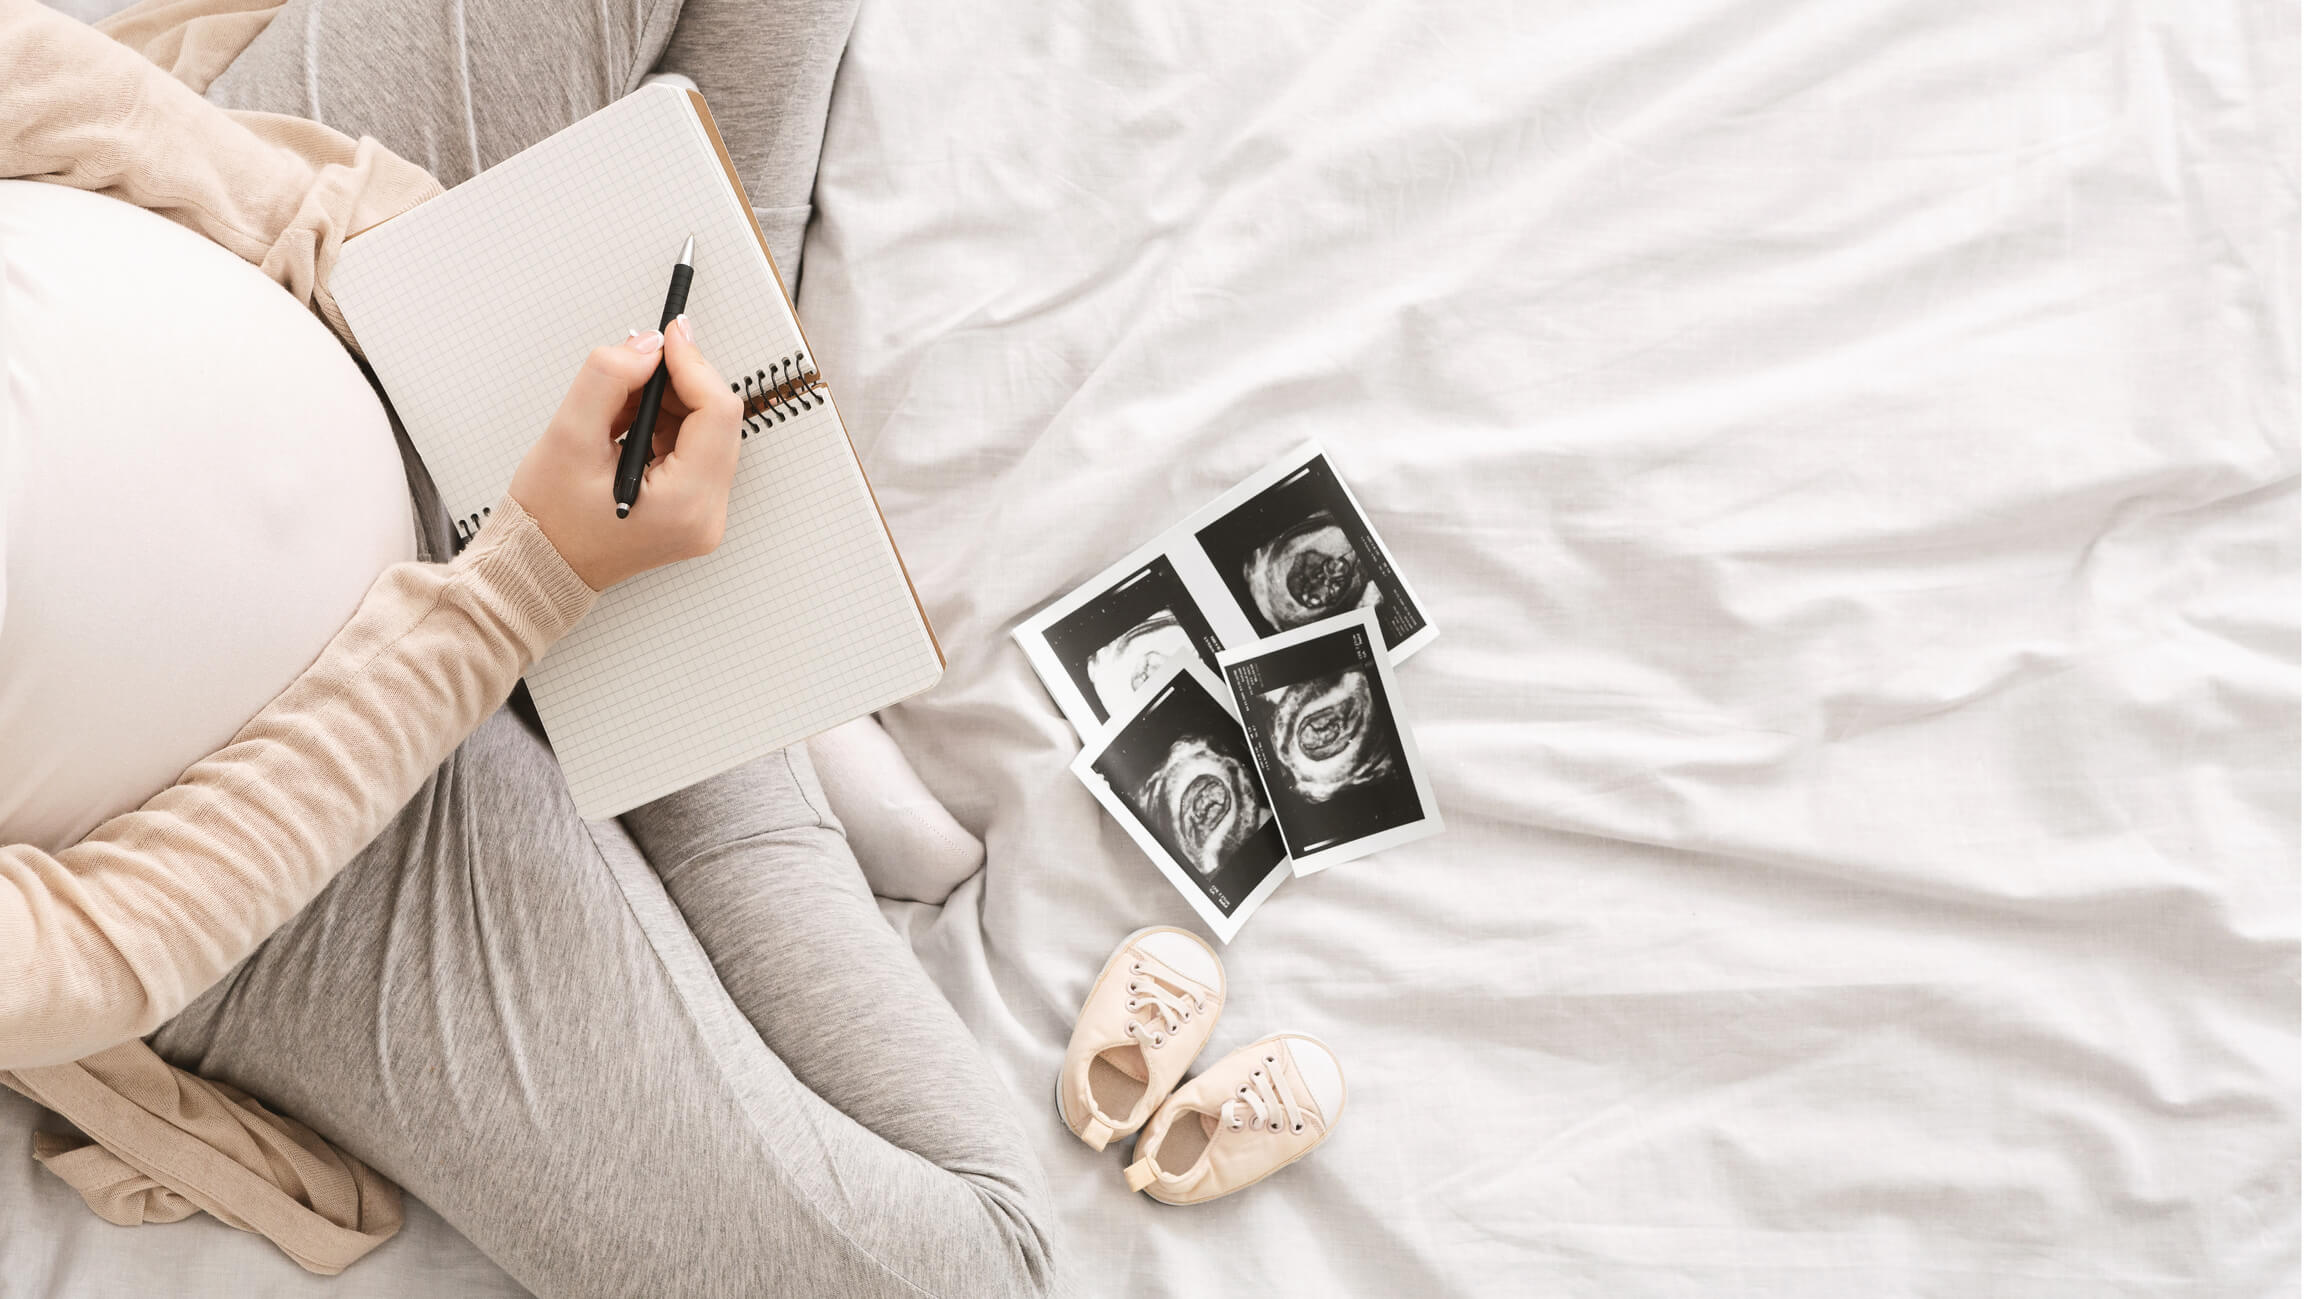 A pregnant woman looking at ultrasound pictures and writing in a notebook.